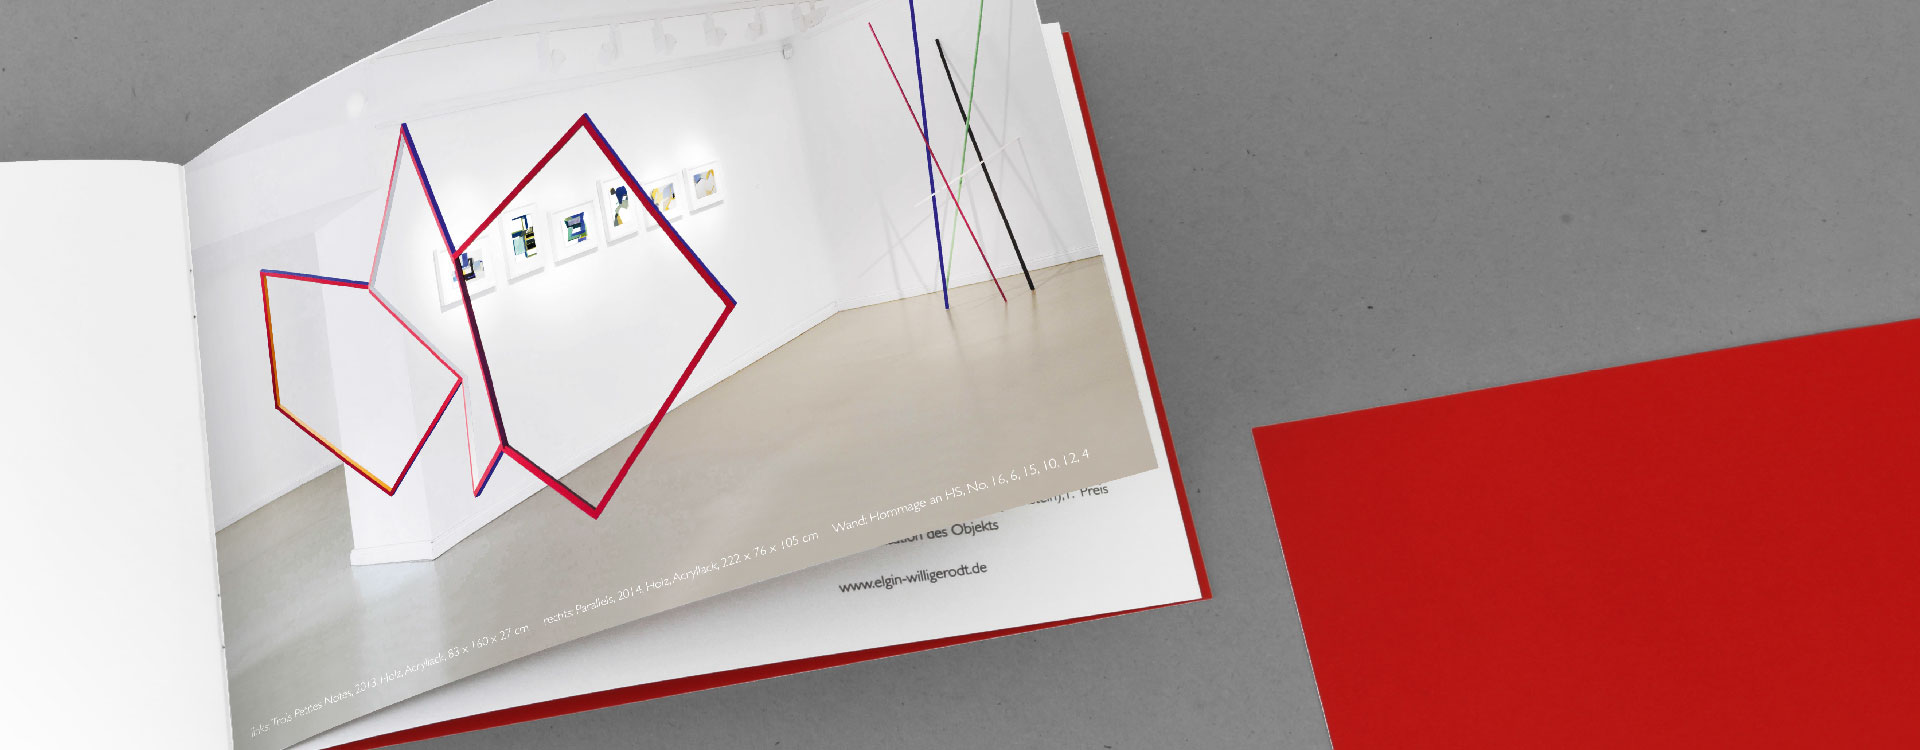 Catalogue Moving Space in the rk Gallery for Contemporary Art, Berlin; Design: Kattrin Richter | Graphic Design Studio 